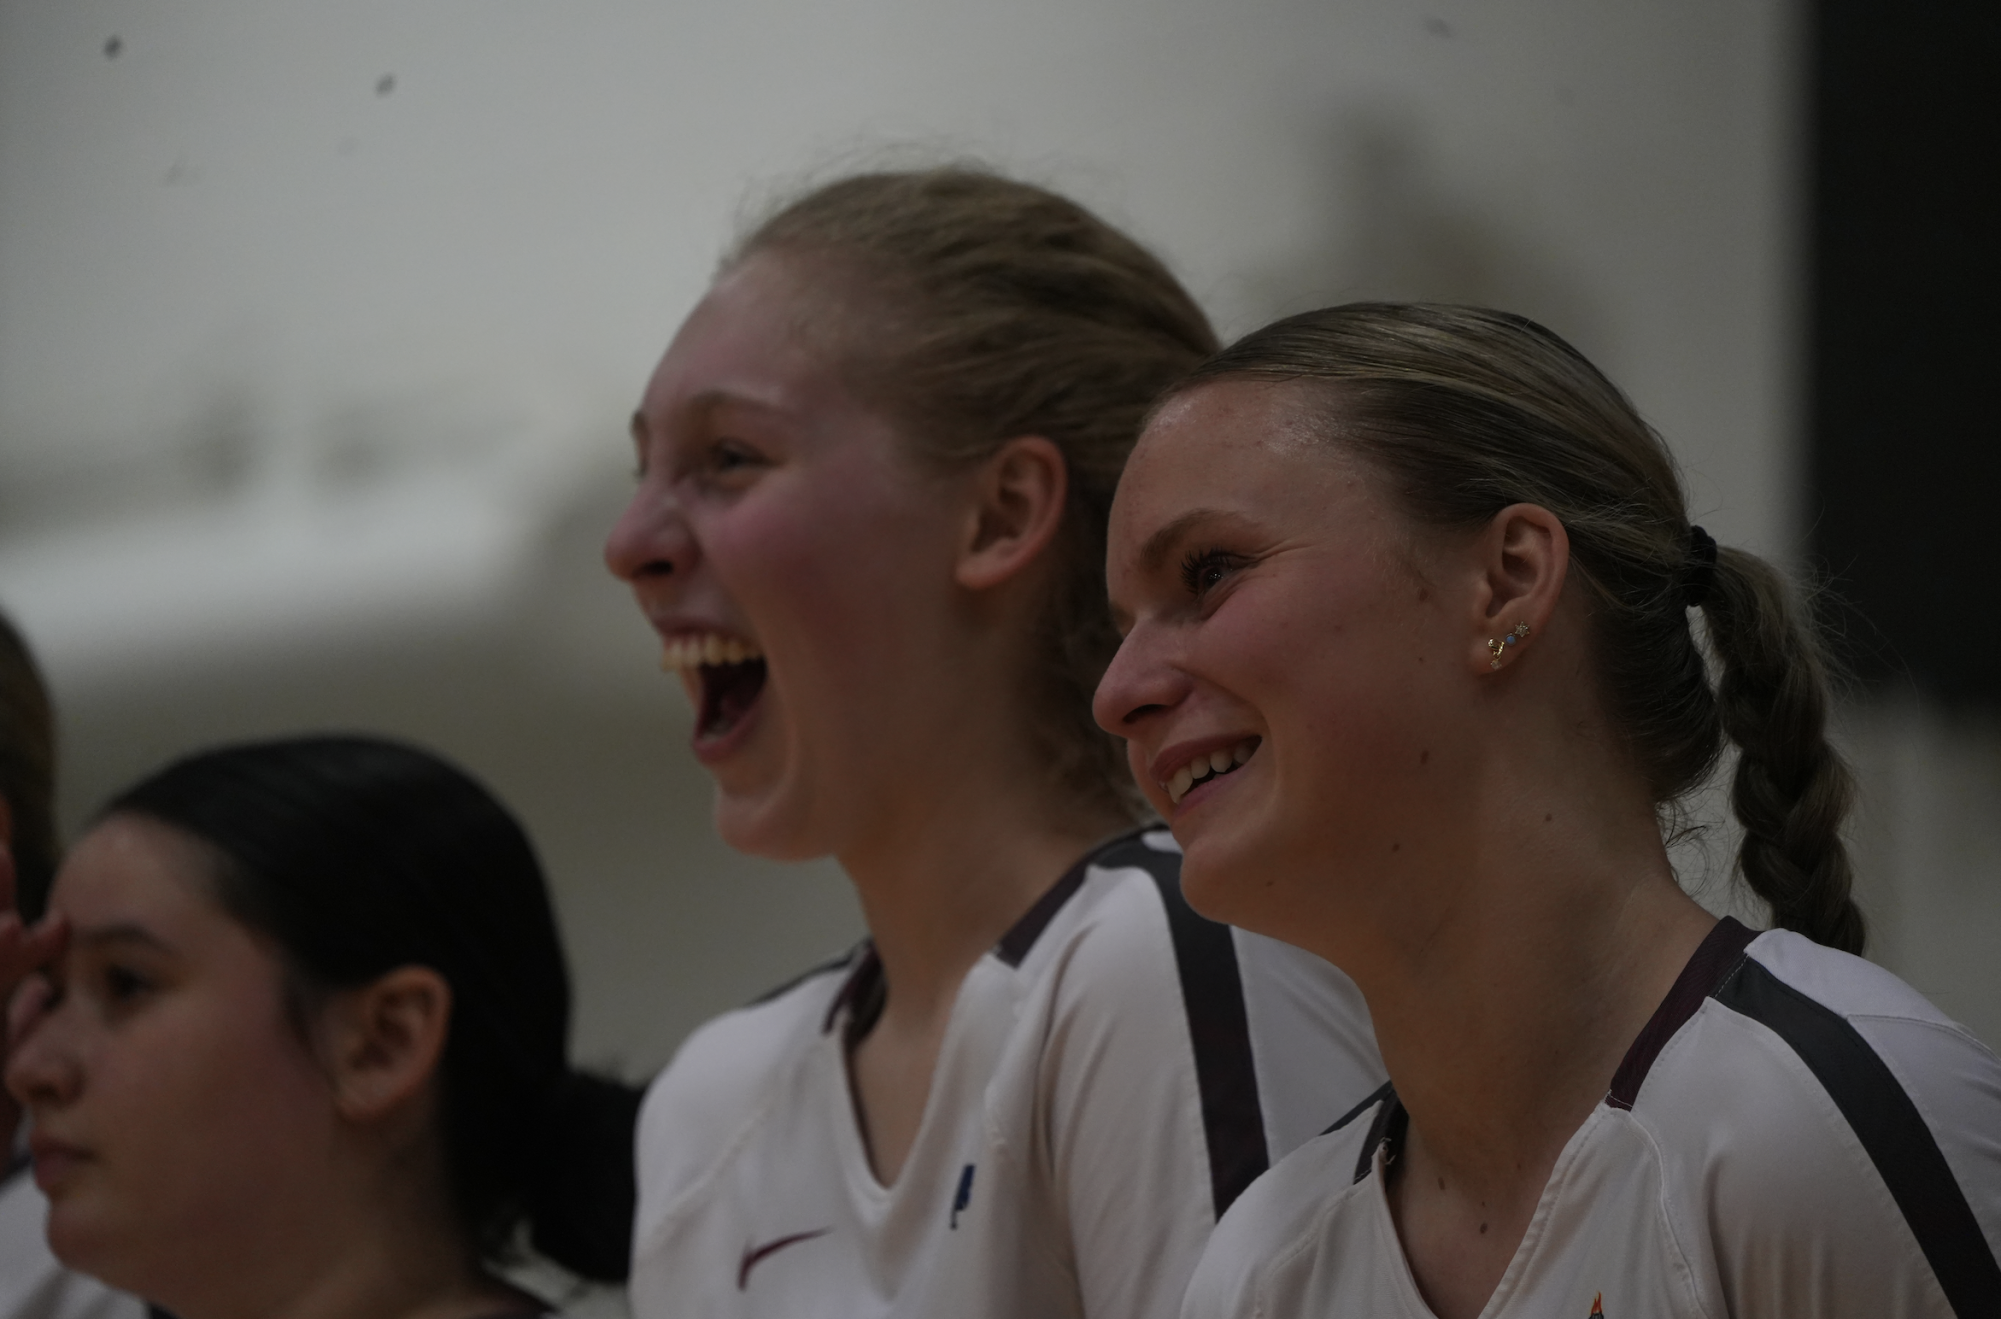 Isabella Maher (right) and Ana Gutman cheer for the team (Photo taken by Nicole Pomerleau @frames_by_nicole)